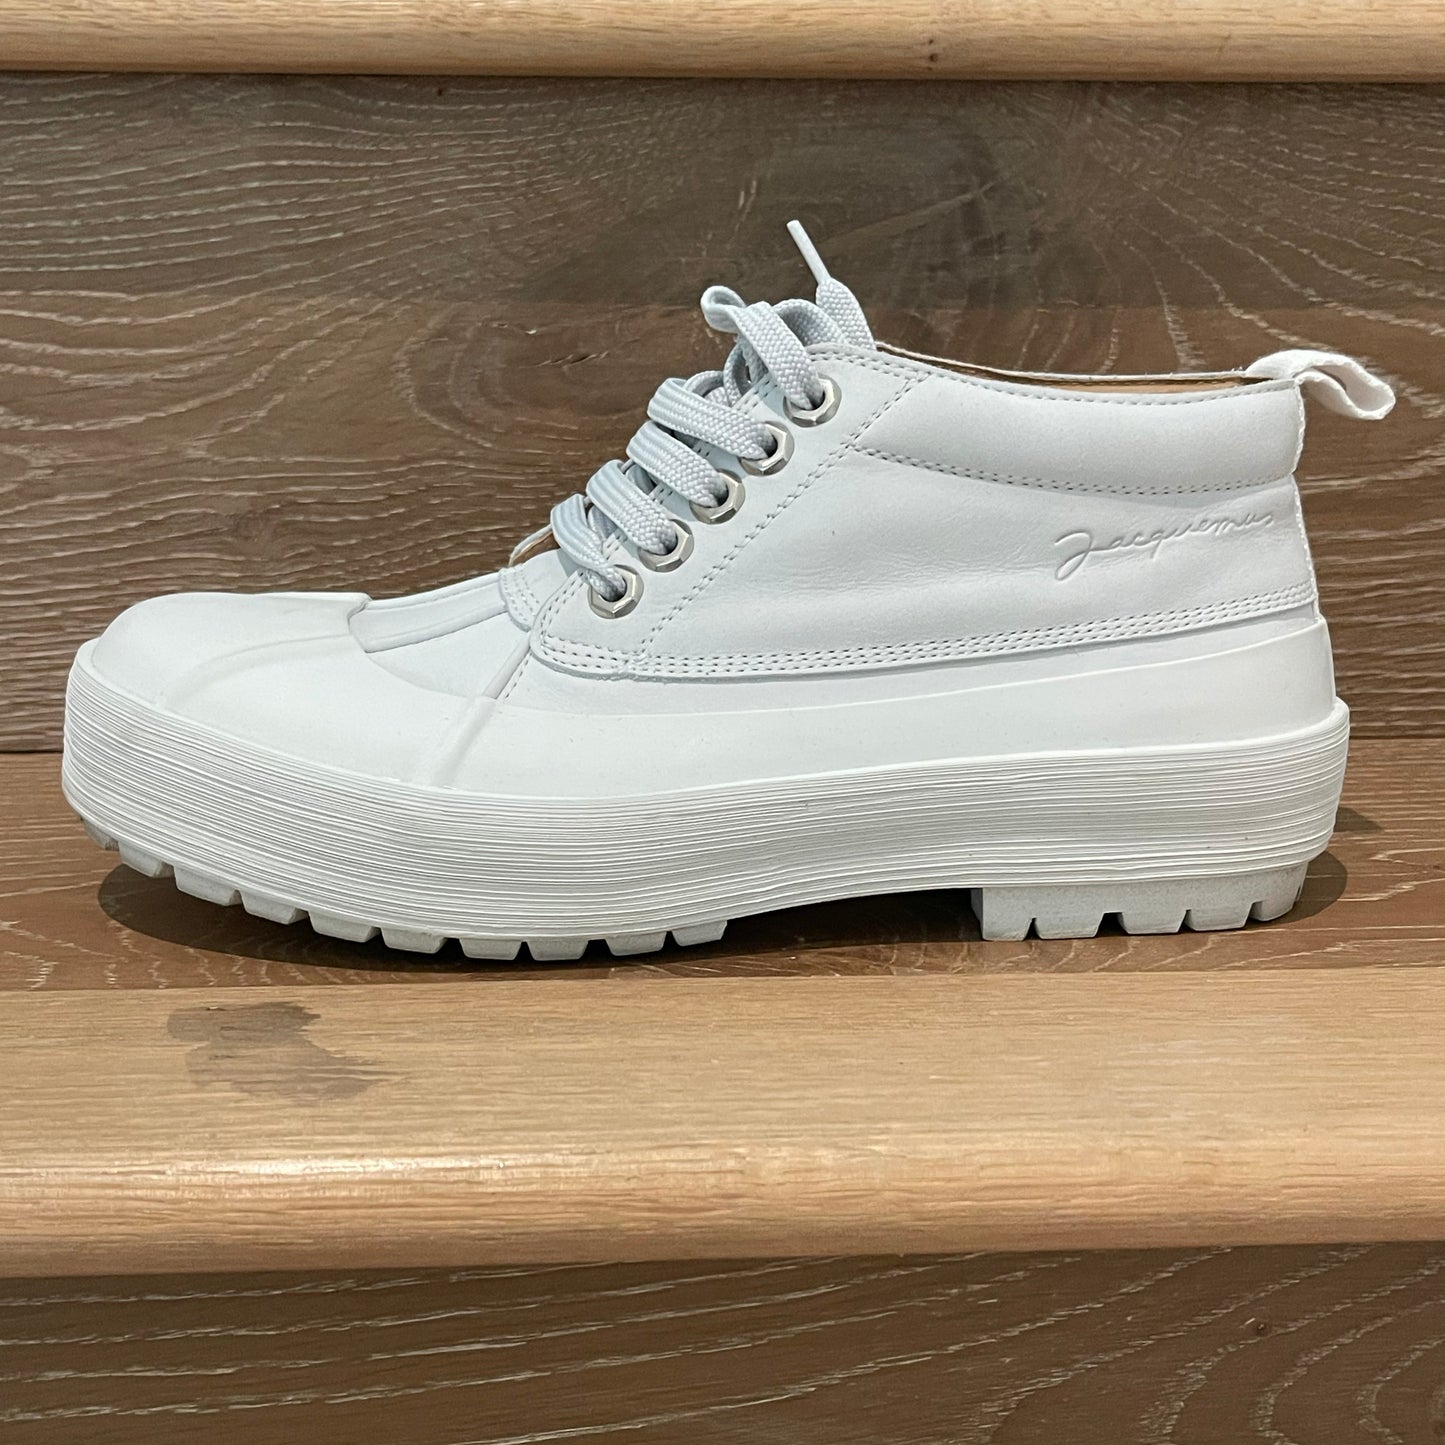 Jacquemus "Les Meuniers" boots in White, size 38